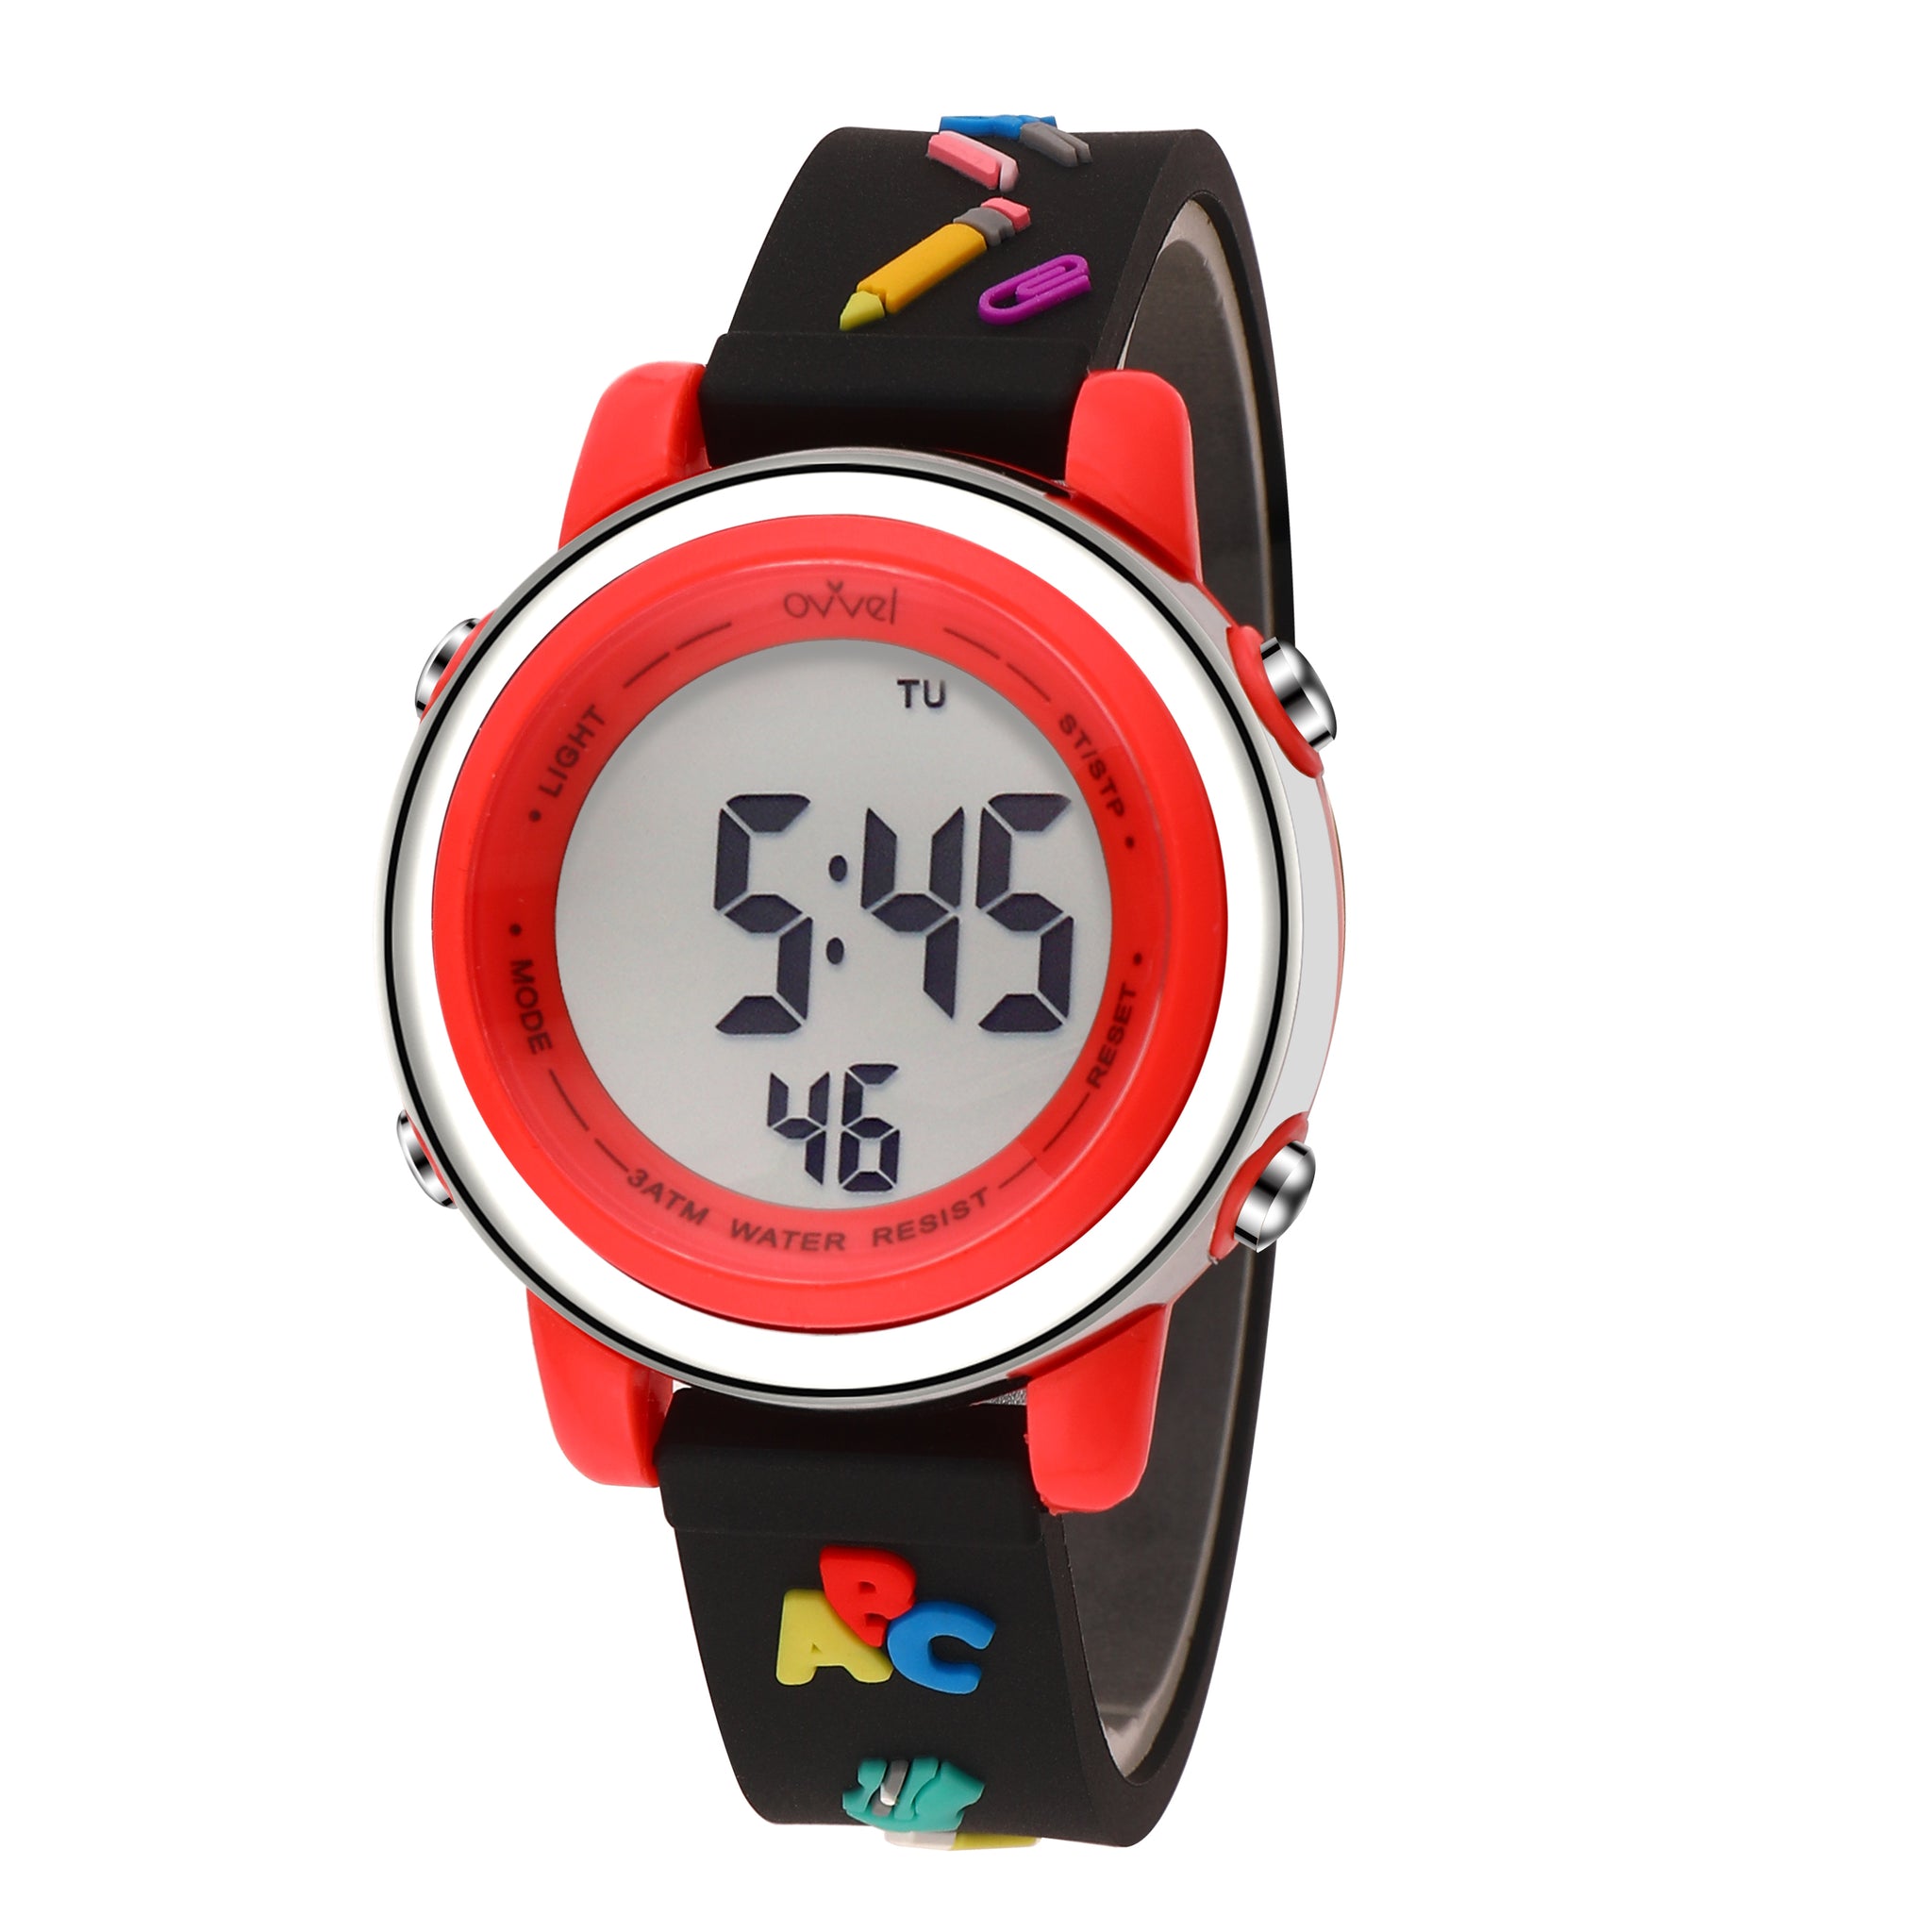 Girls Digital Sports Watch with many features - School Supplies